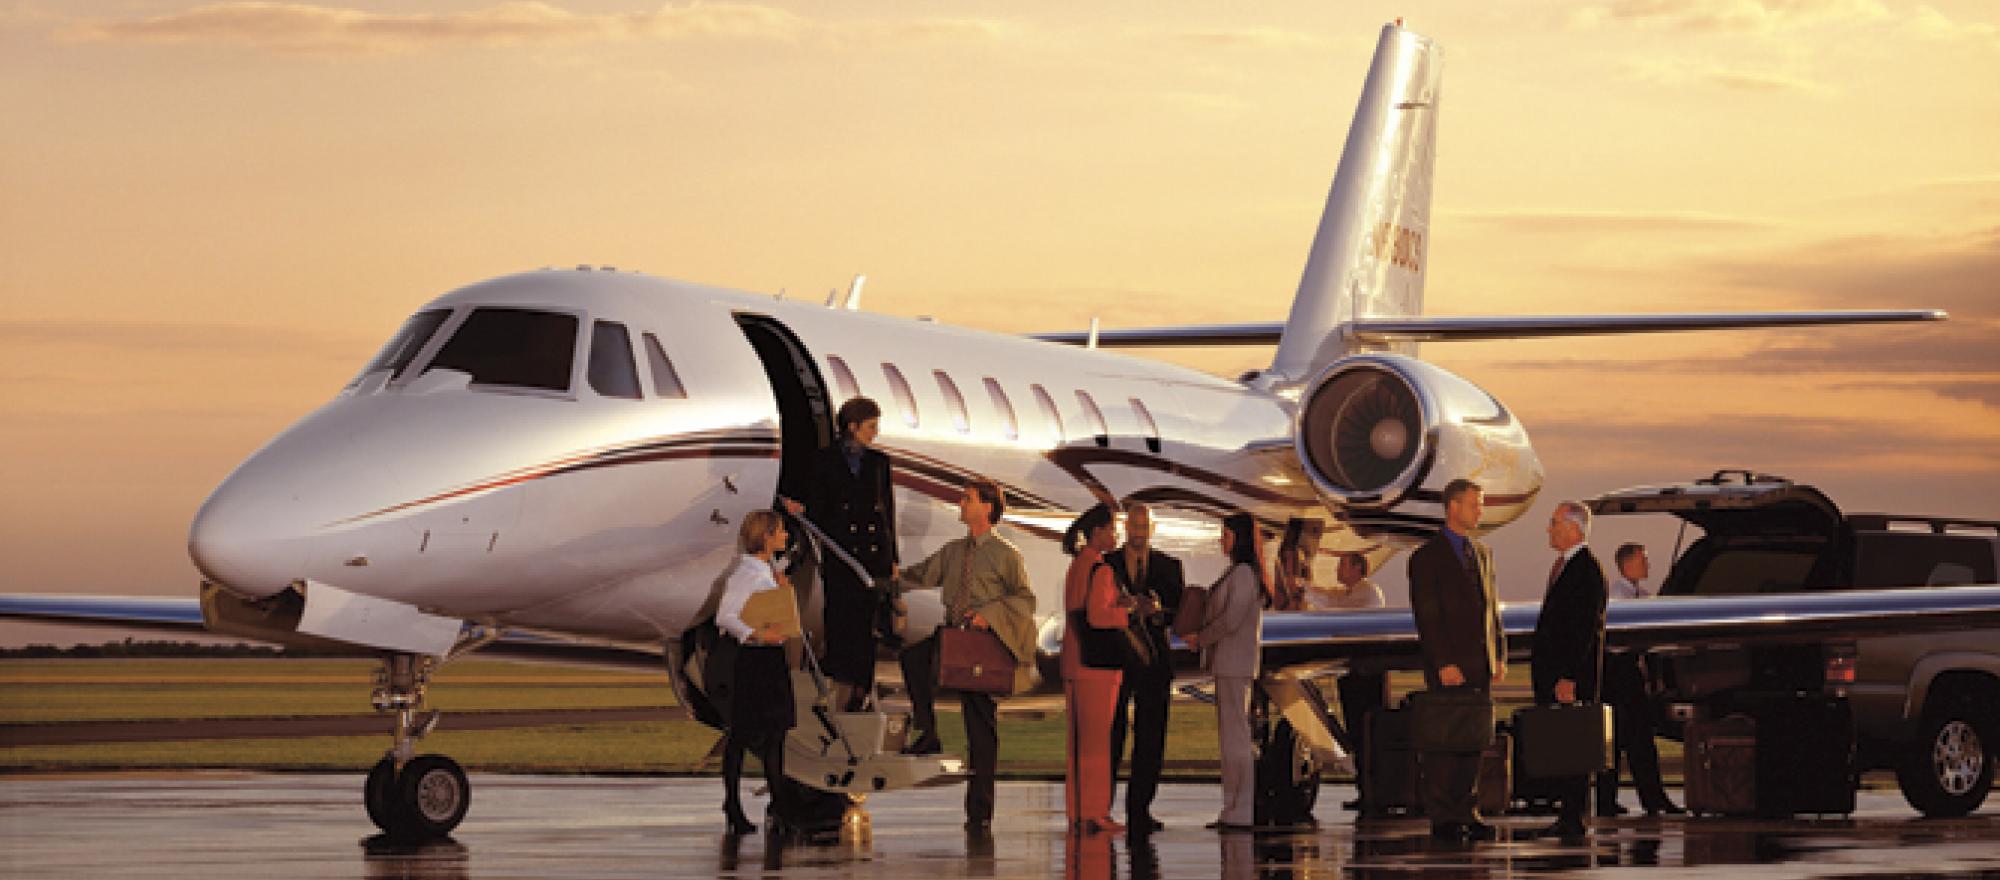 Charter operators employ more than 300 makes and models of business aircraft,